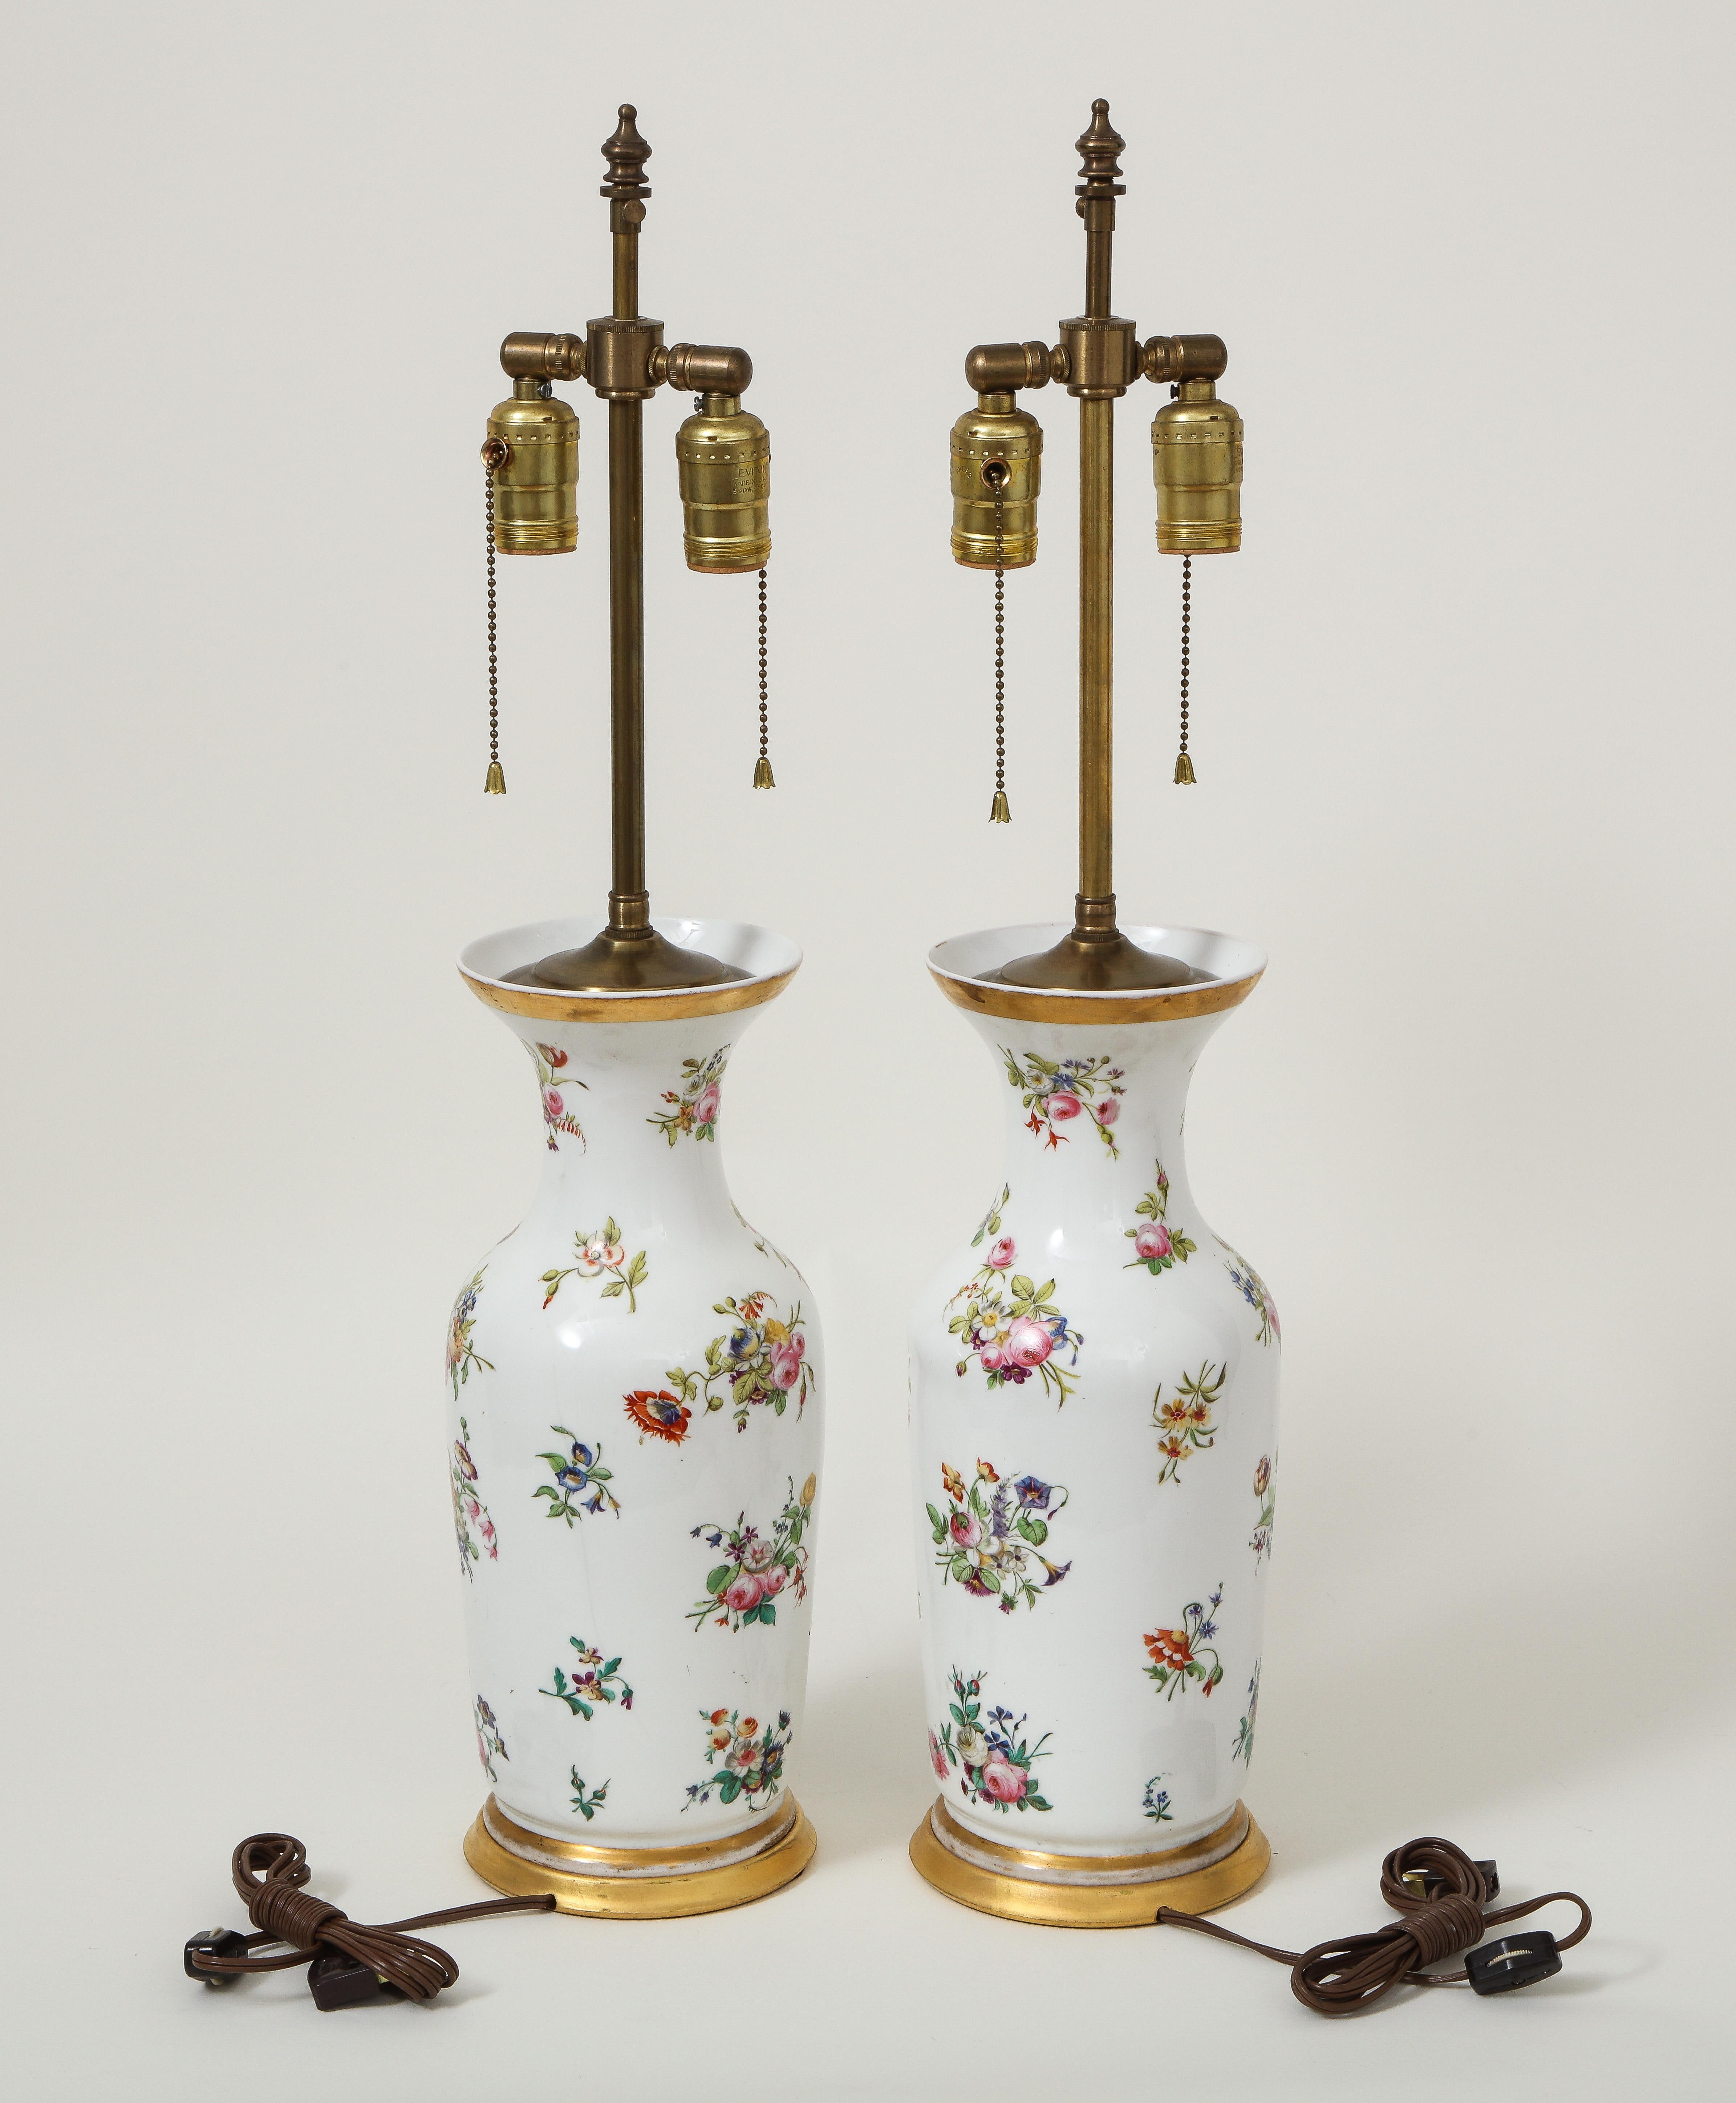 19th Century Pair of Victorian Porcelain Polychrome Decorated Vases Mounted as Lamps